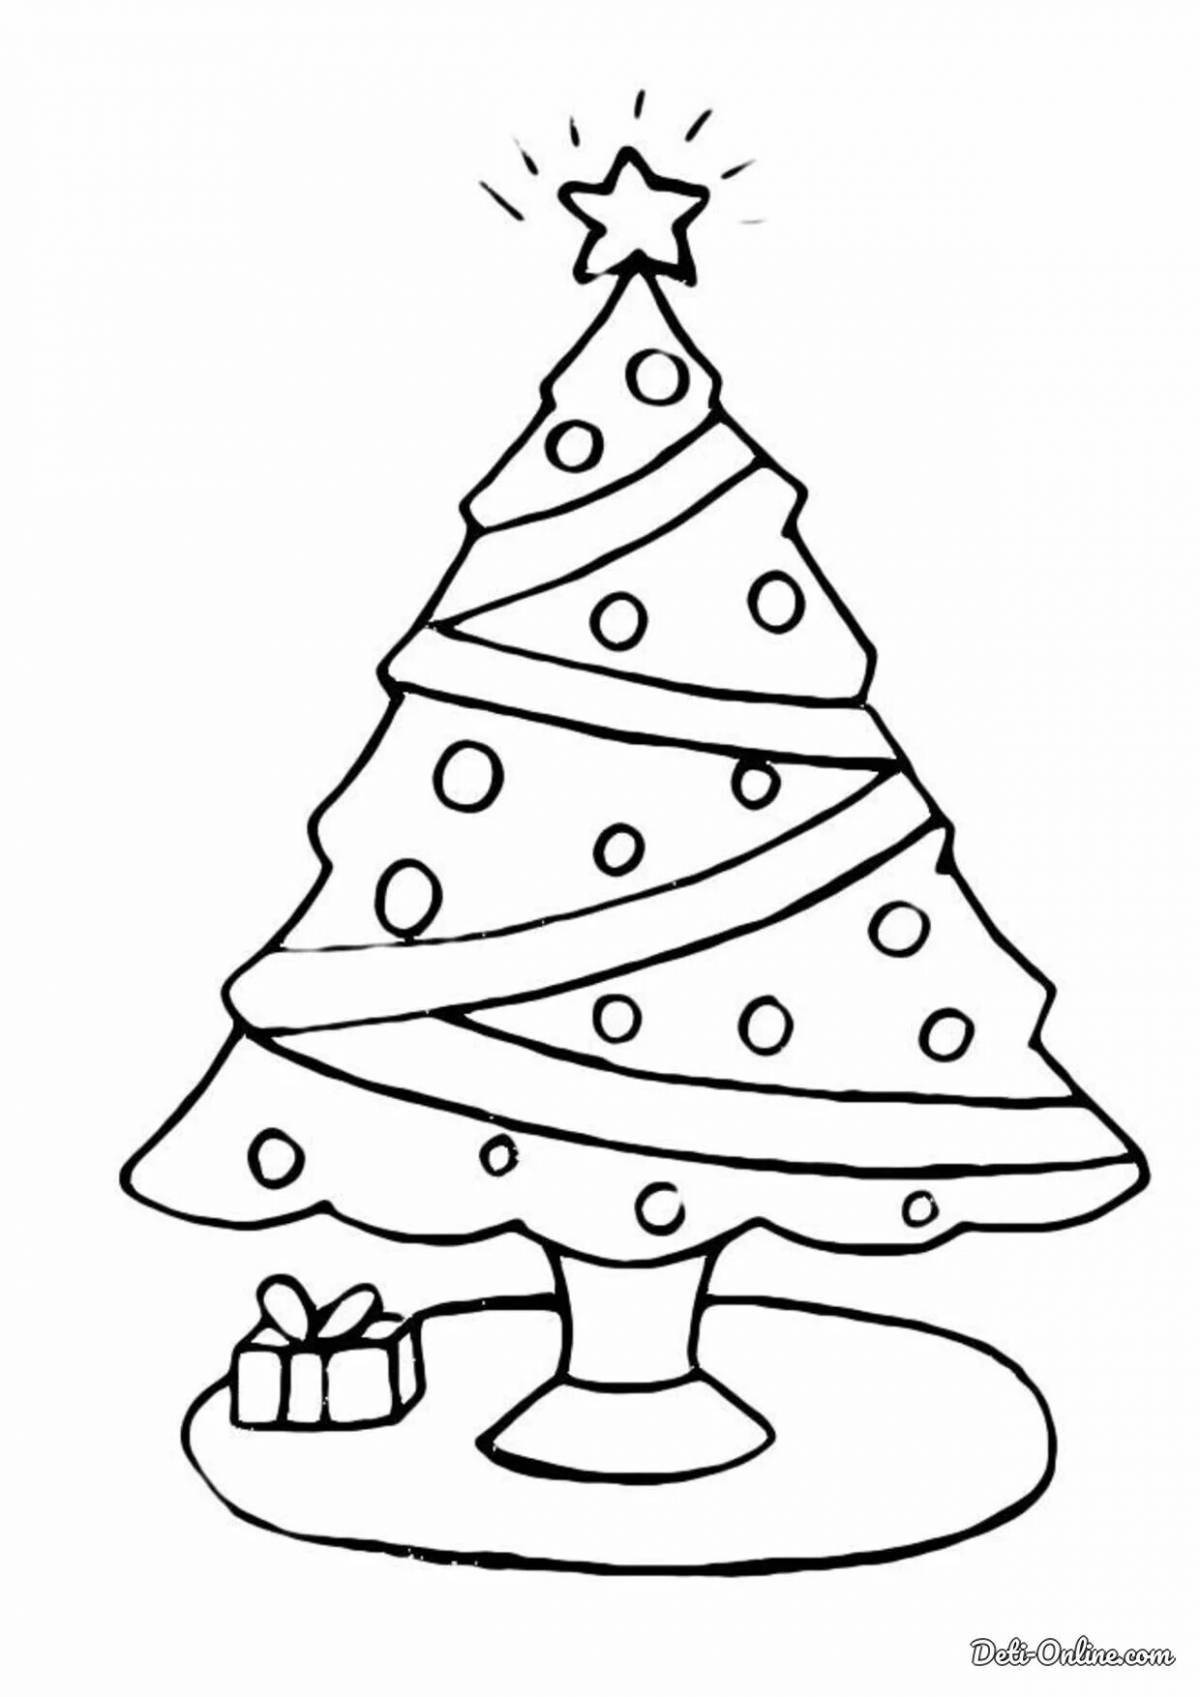 Christmas merry simple coloring